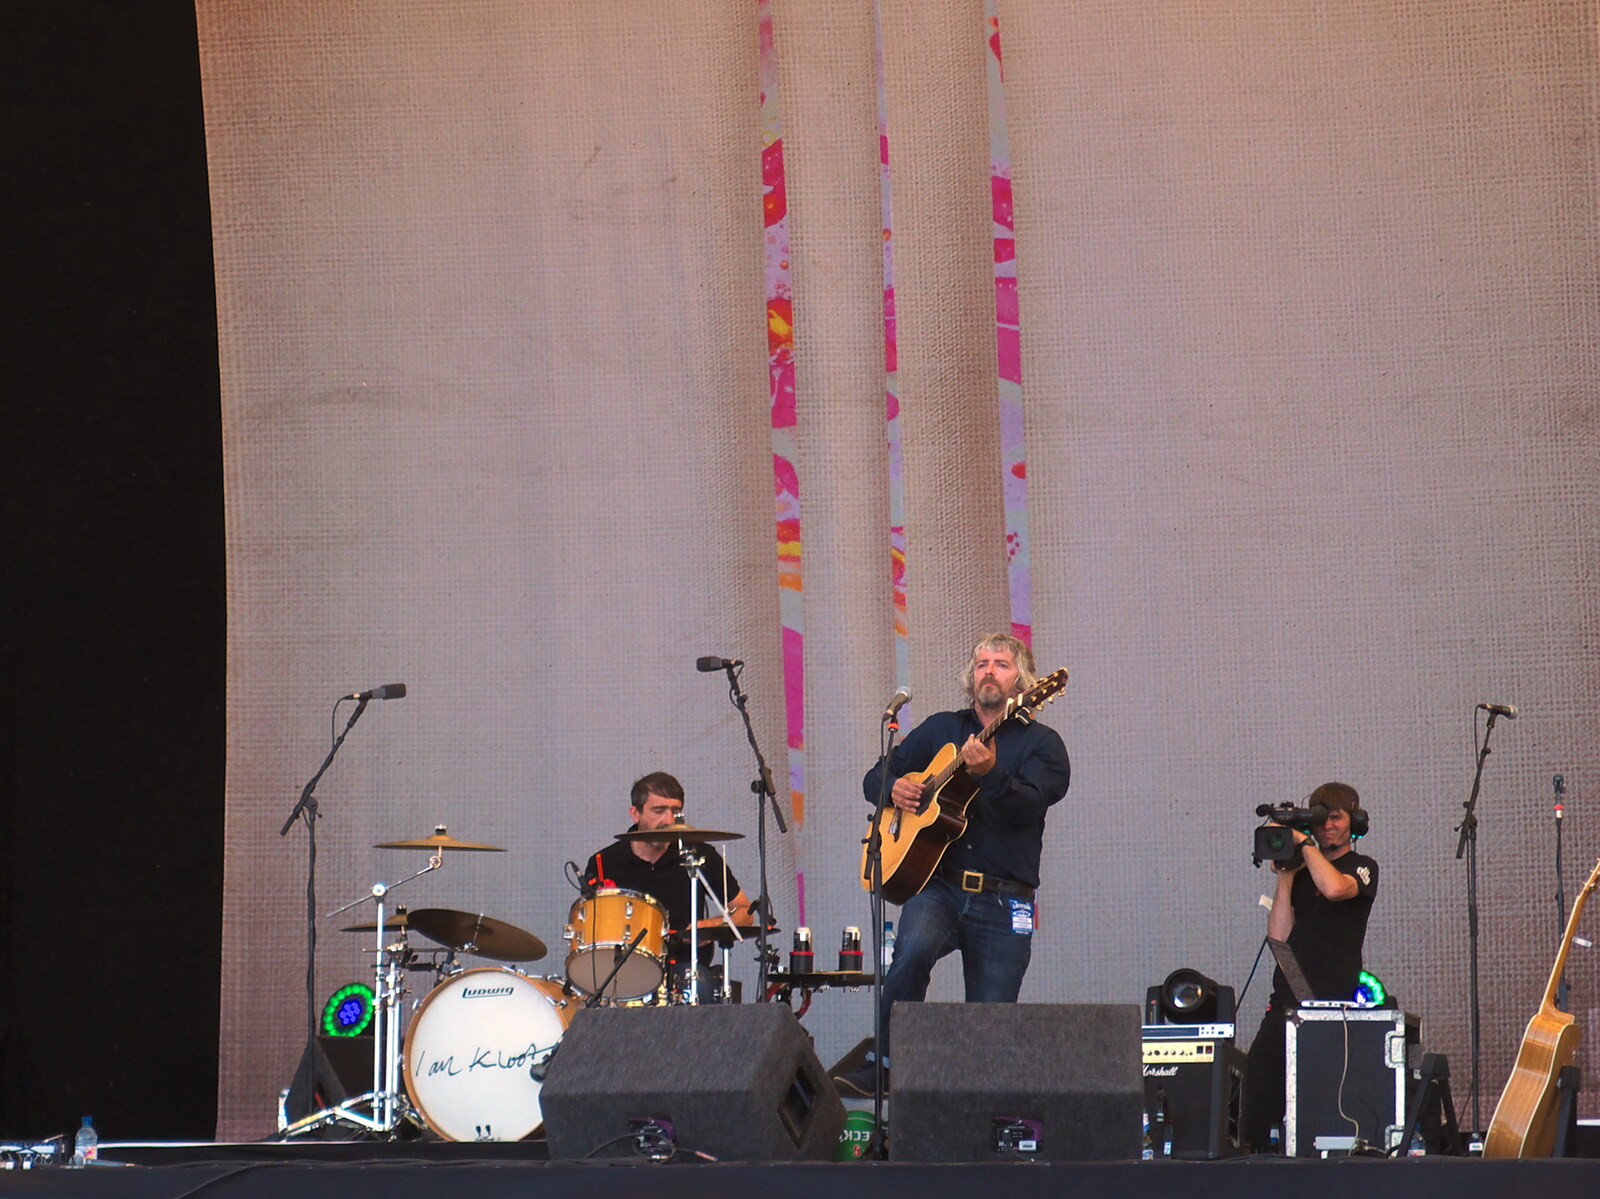 John Bramwell and Andy Hargreaves from The 8th Latitude Festival, Henham Park, Southwold, Suffolk - 18th July 2013